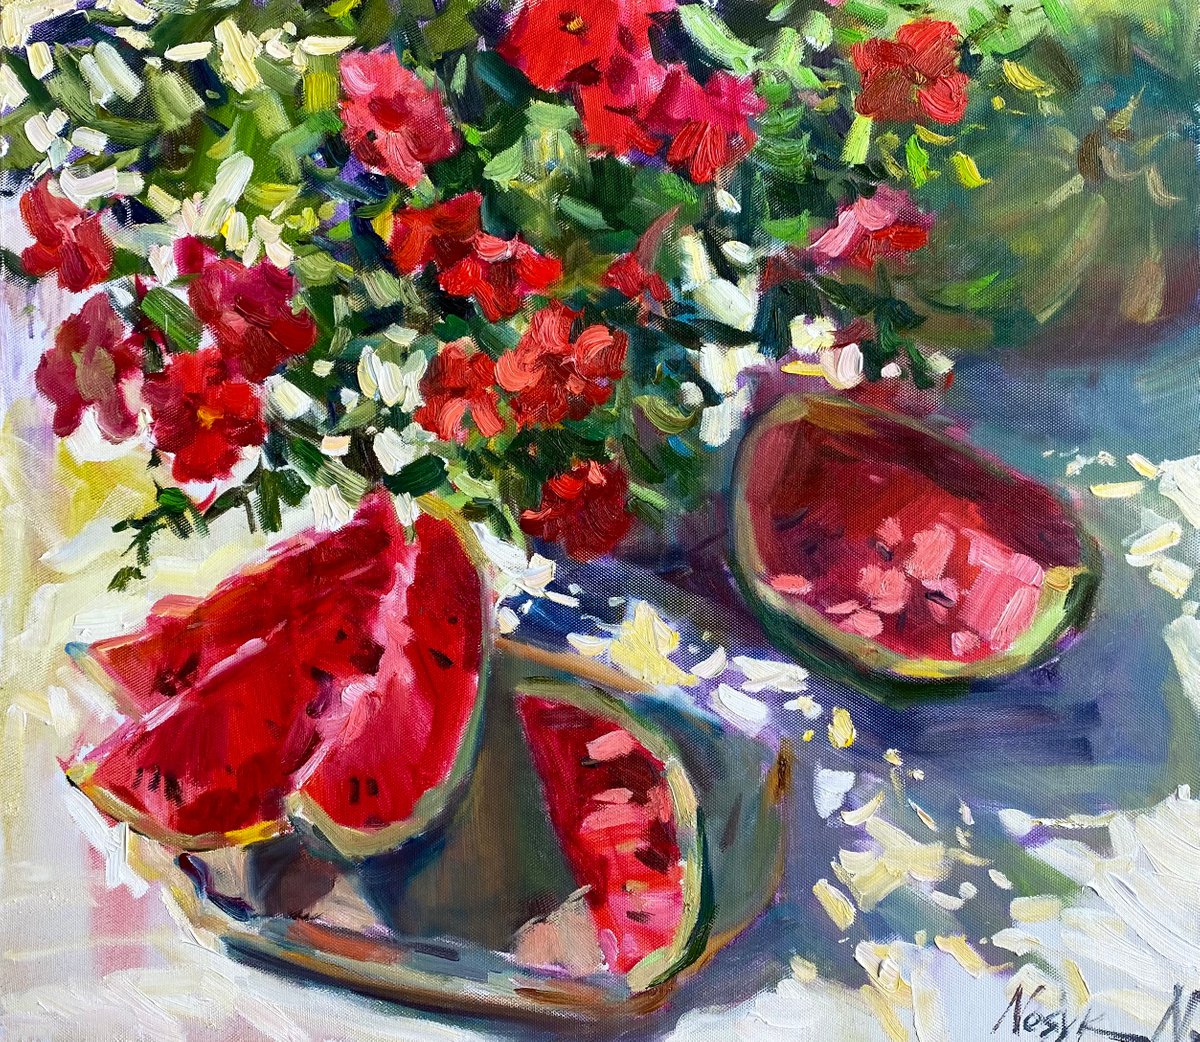 Red petunias and watermelon 70x80cm | oil painting on canvas flowers by Nataliia Nosyk